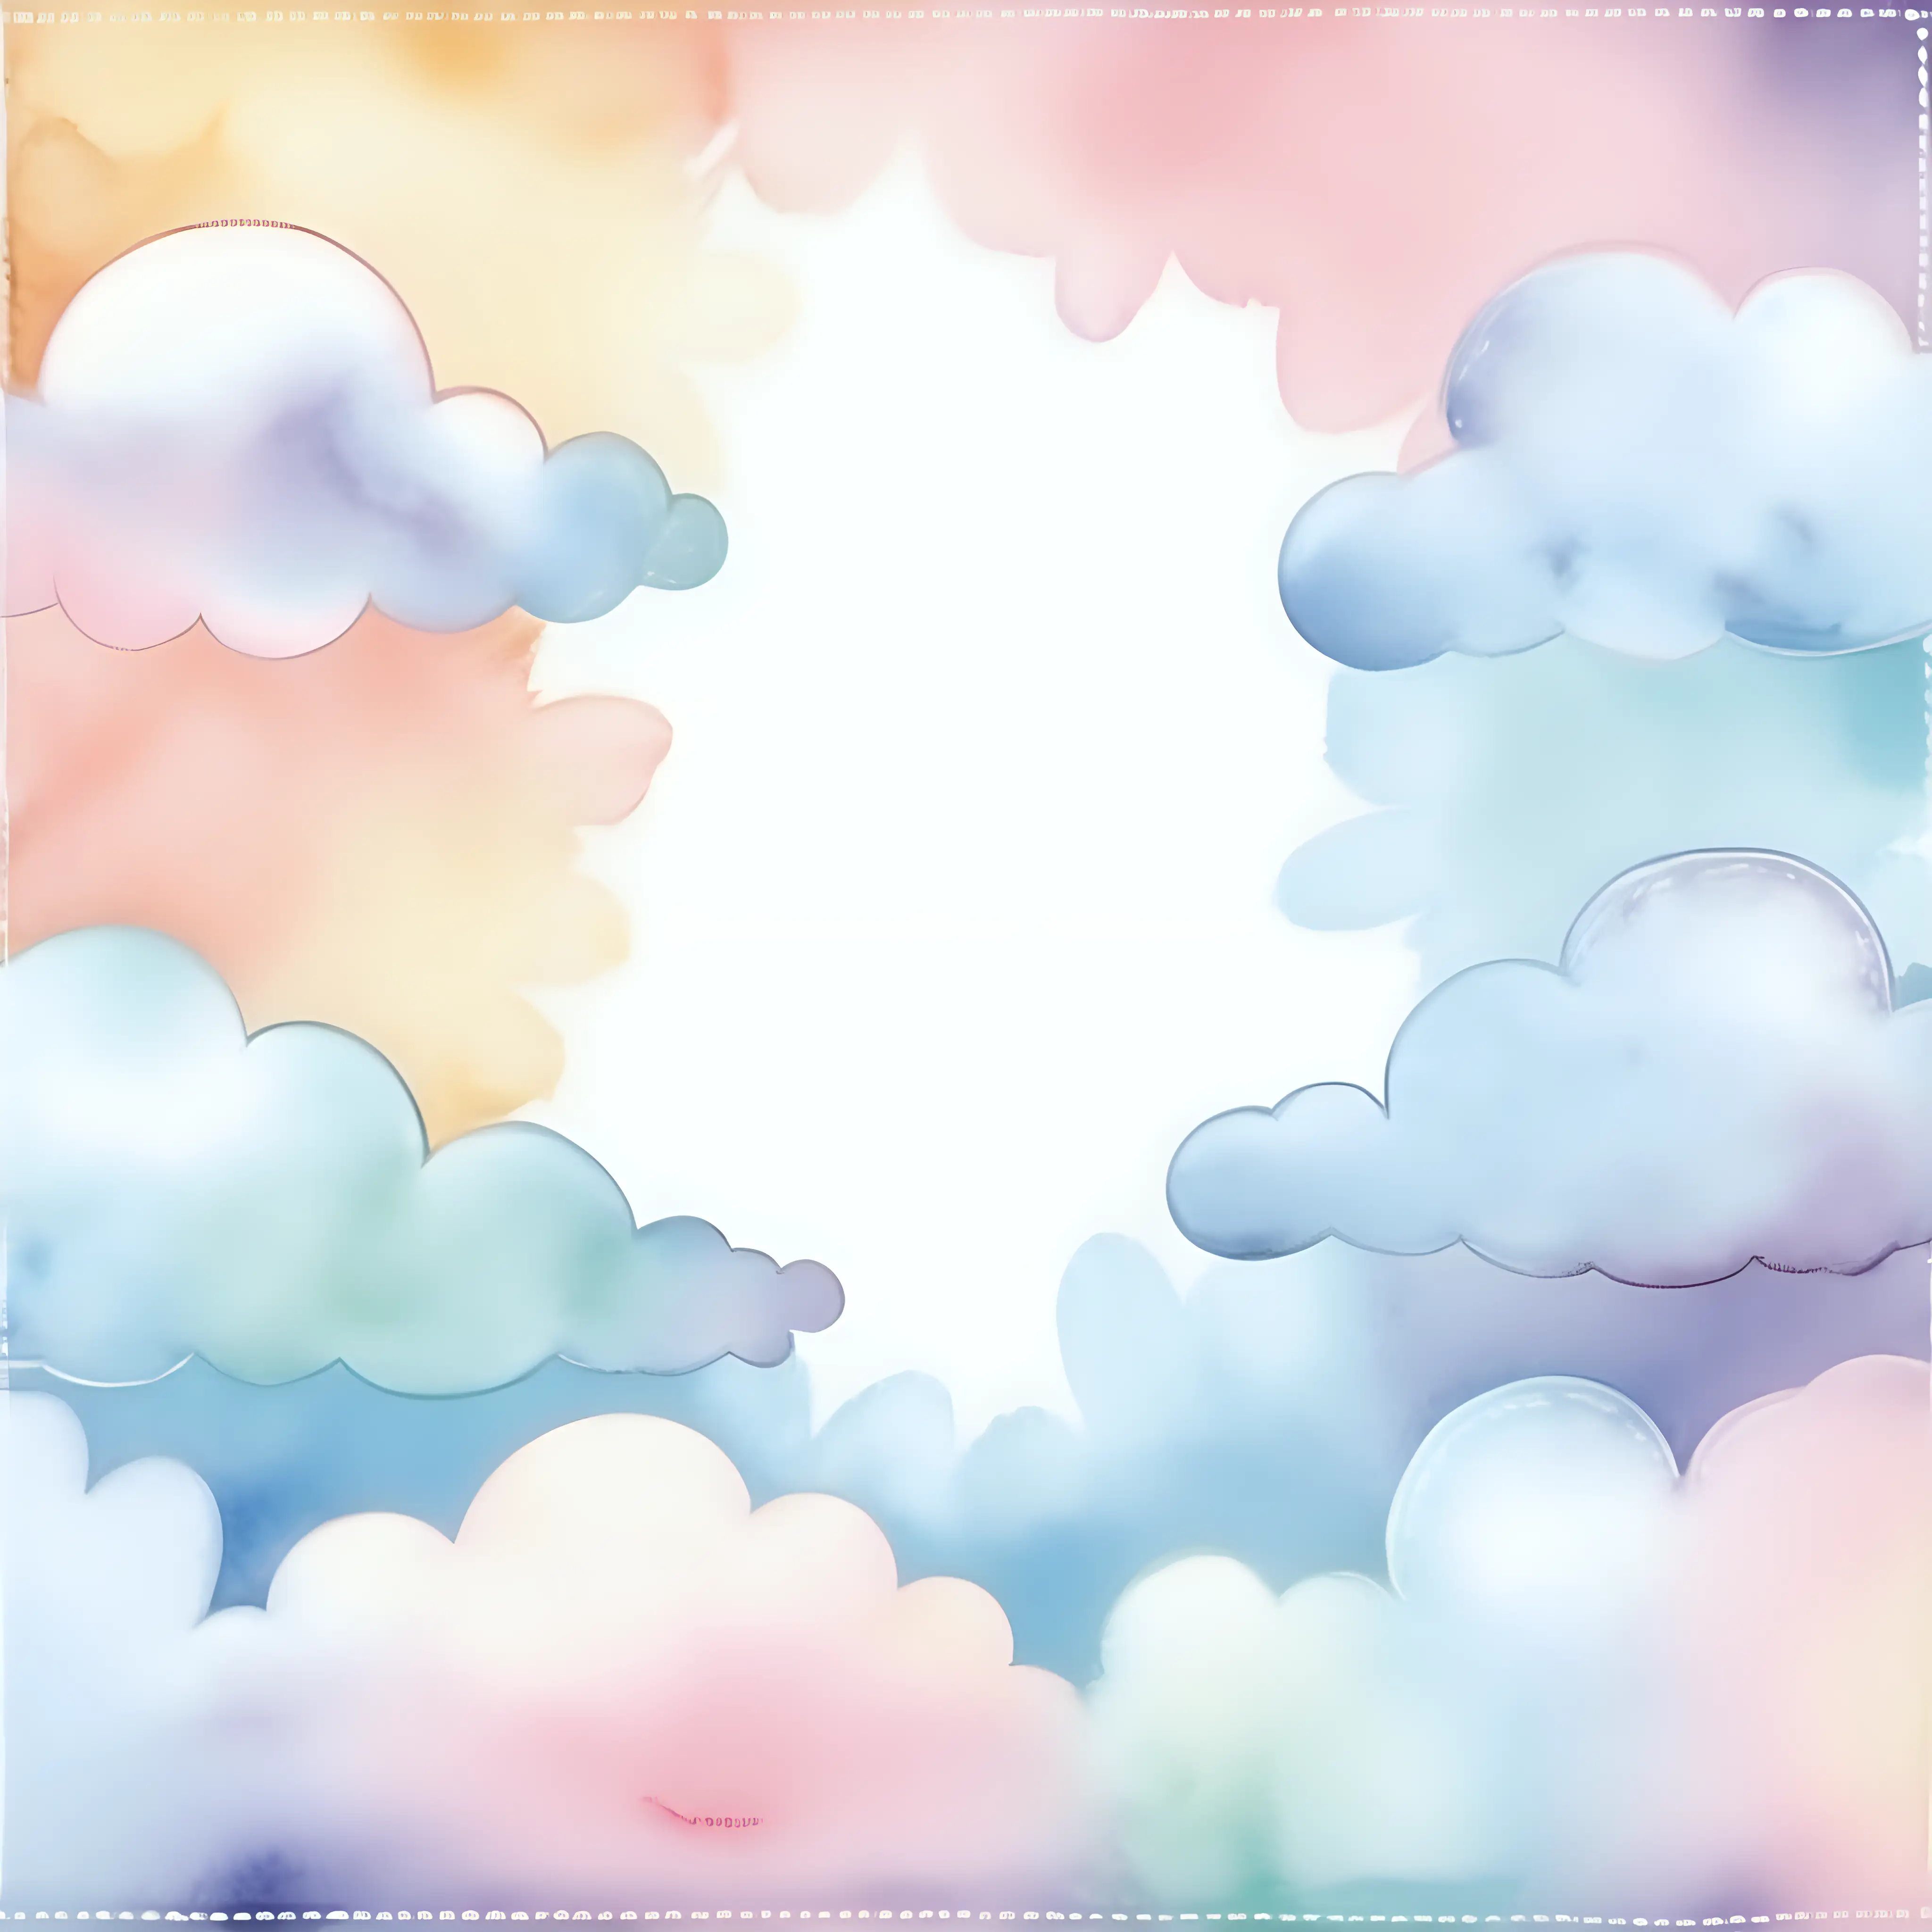 watercolored style pastel cloud straight border
